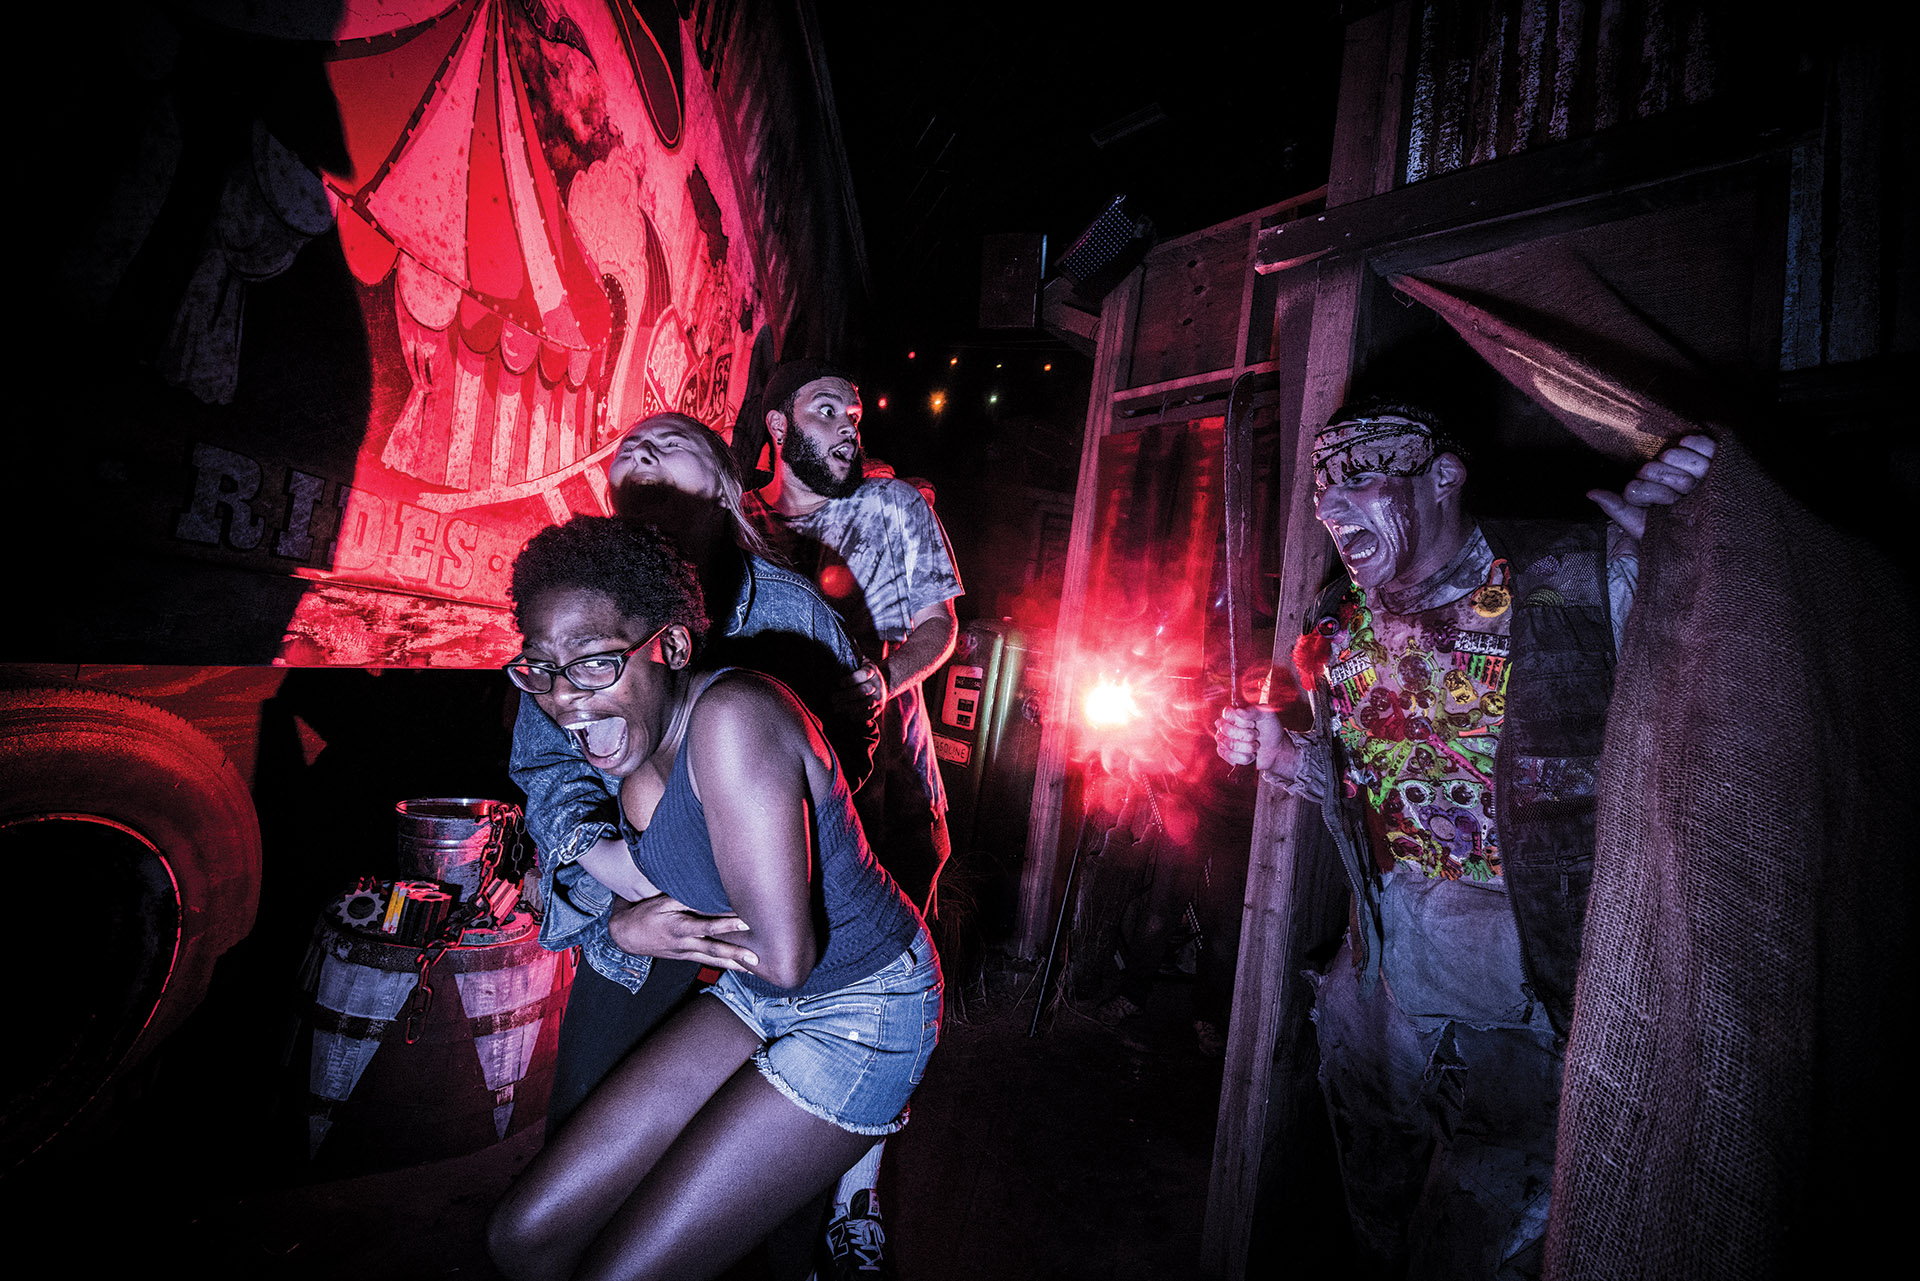 Halloween Horror Nights 2020 To Celebrate 30 Years Of Fear At Universal Orlando Orlando Parkstop